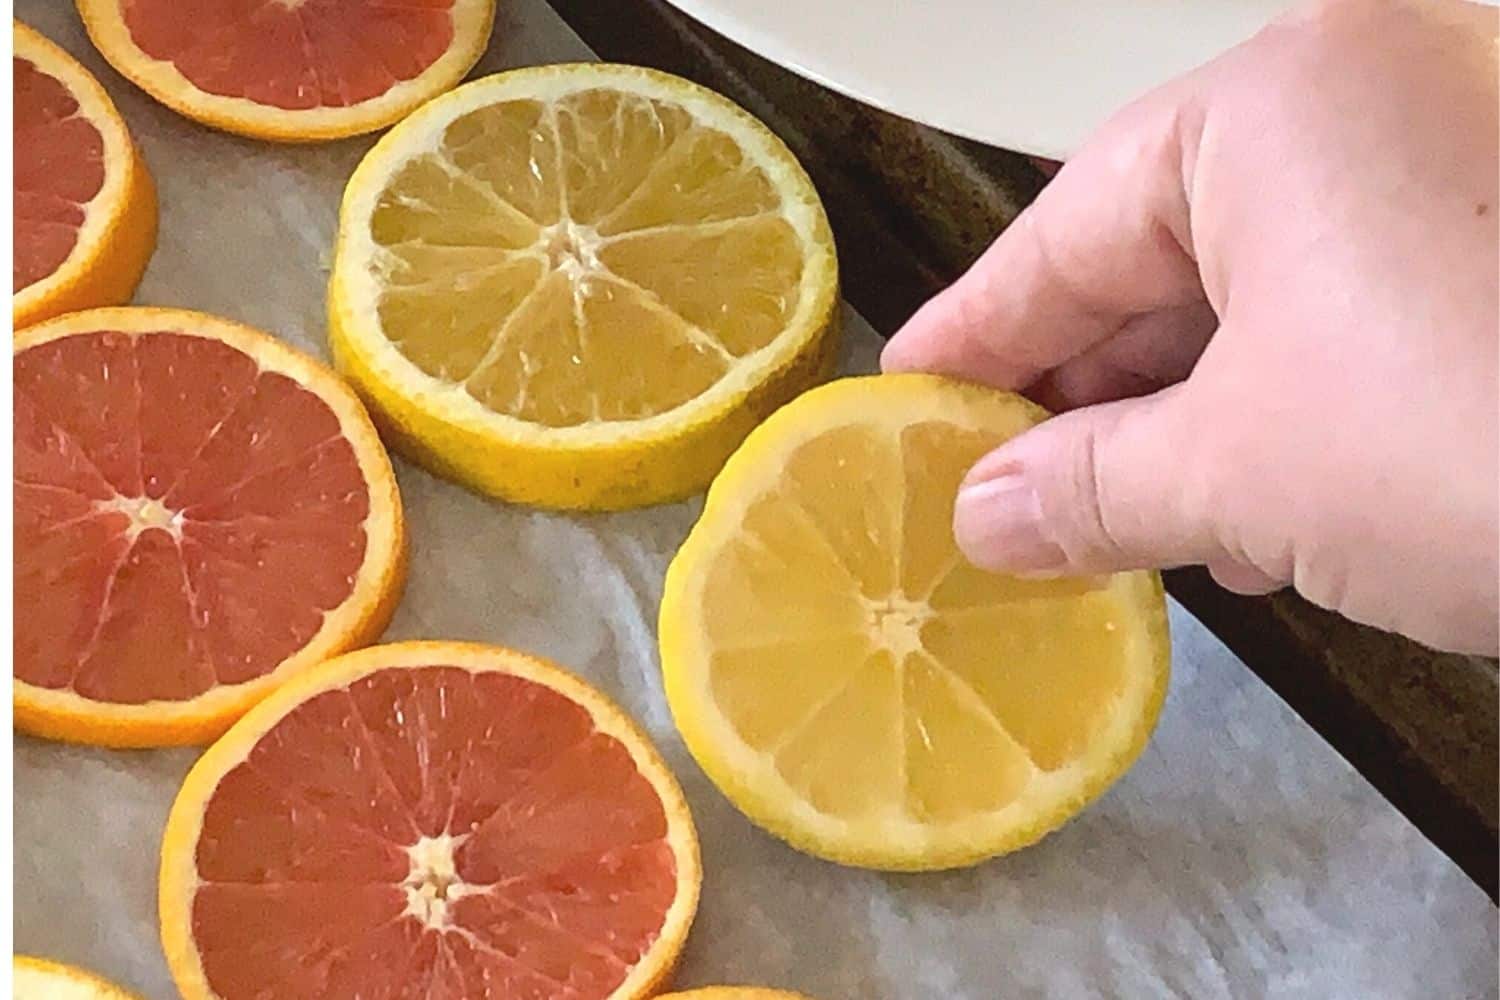 laying out the orange slices to be dried